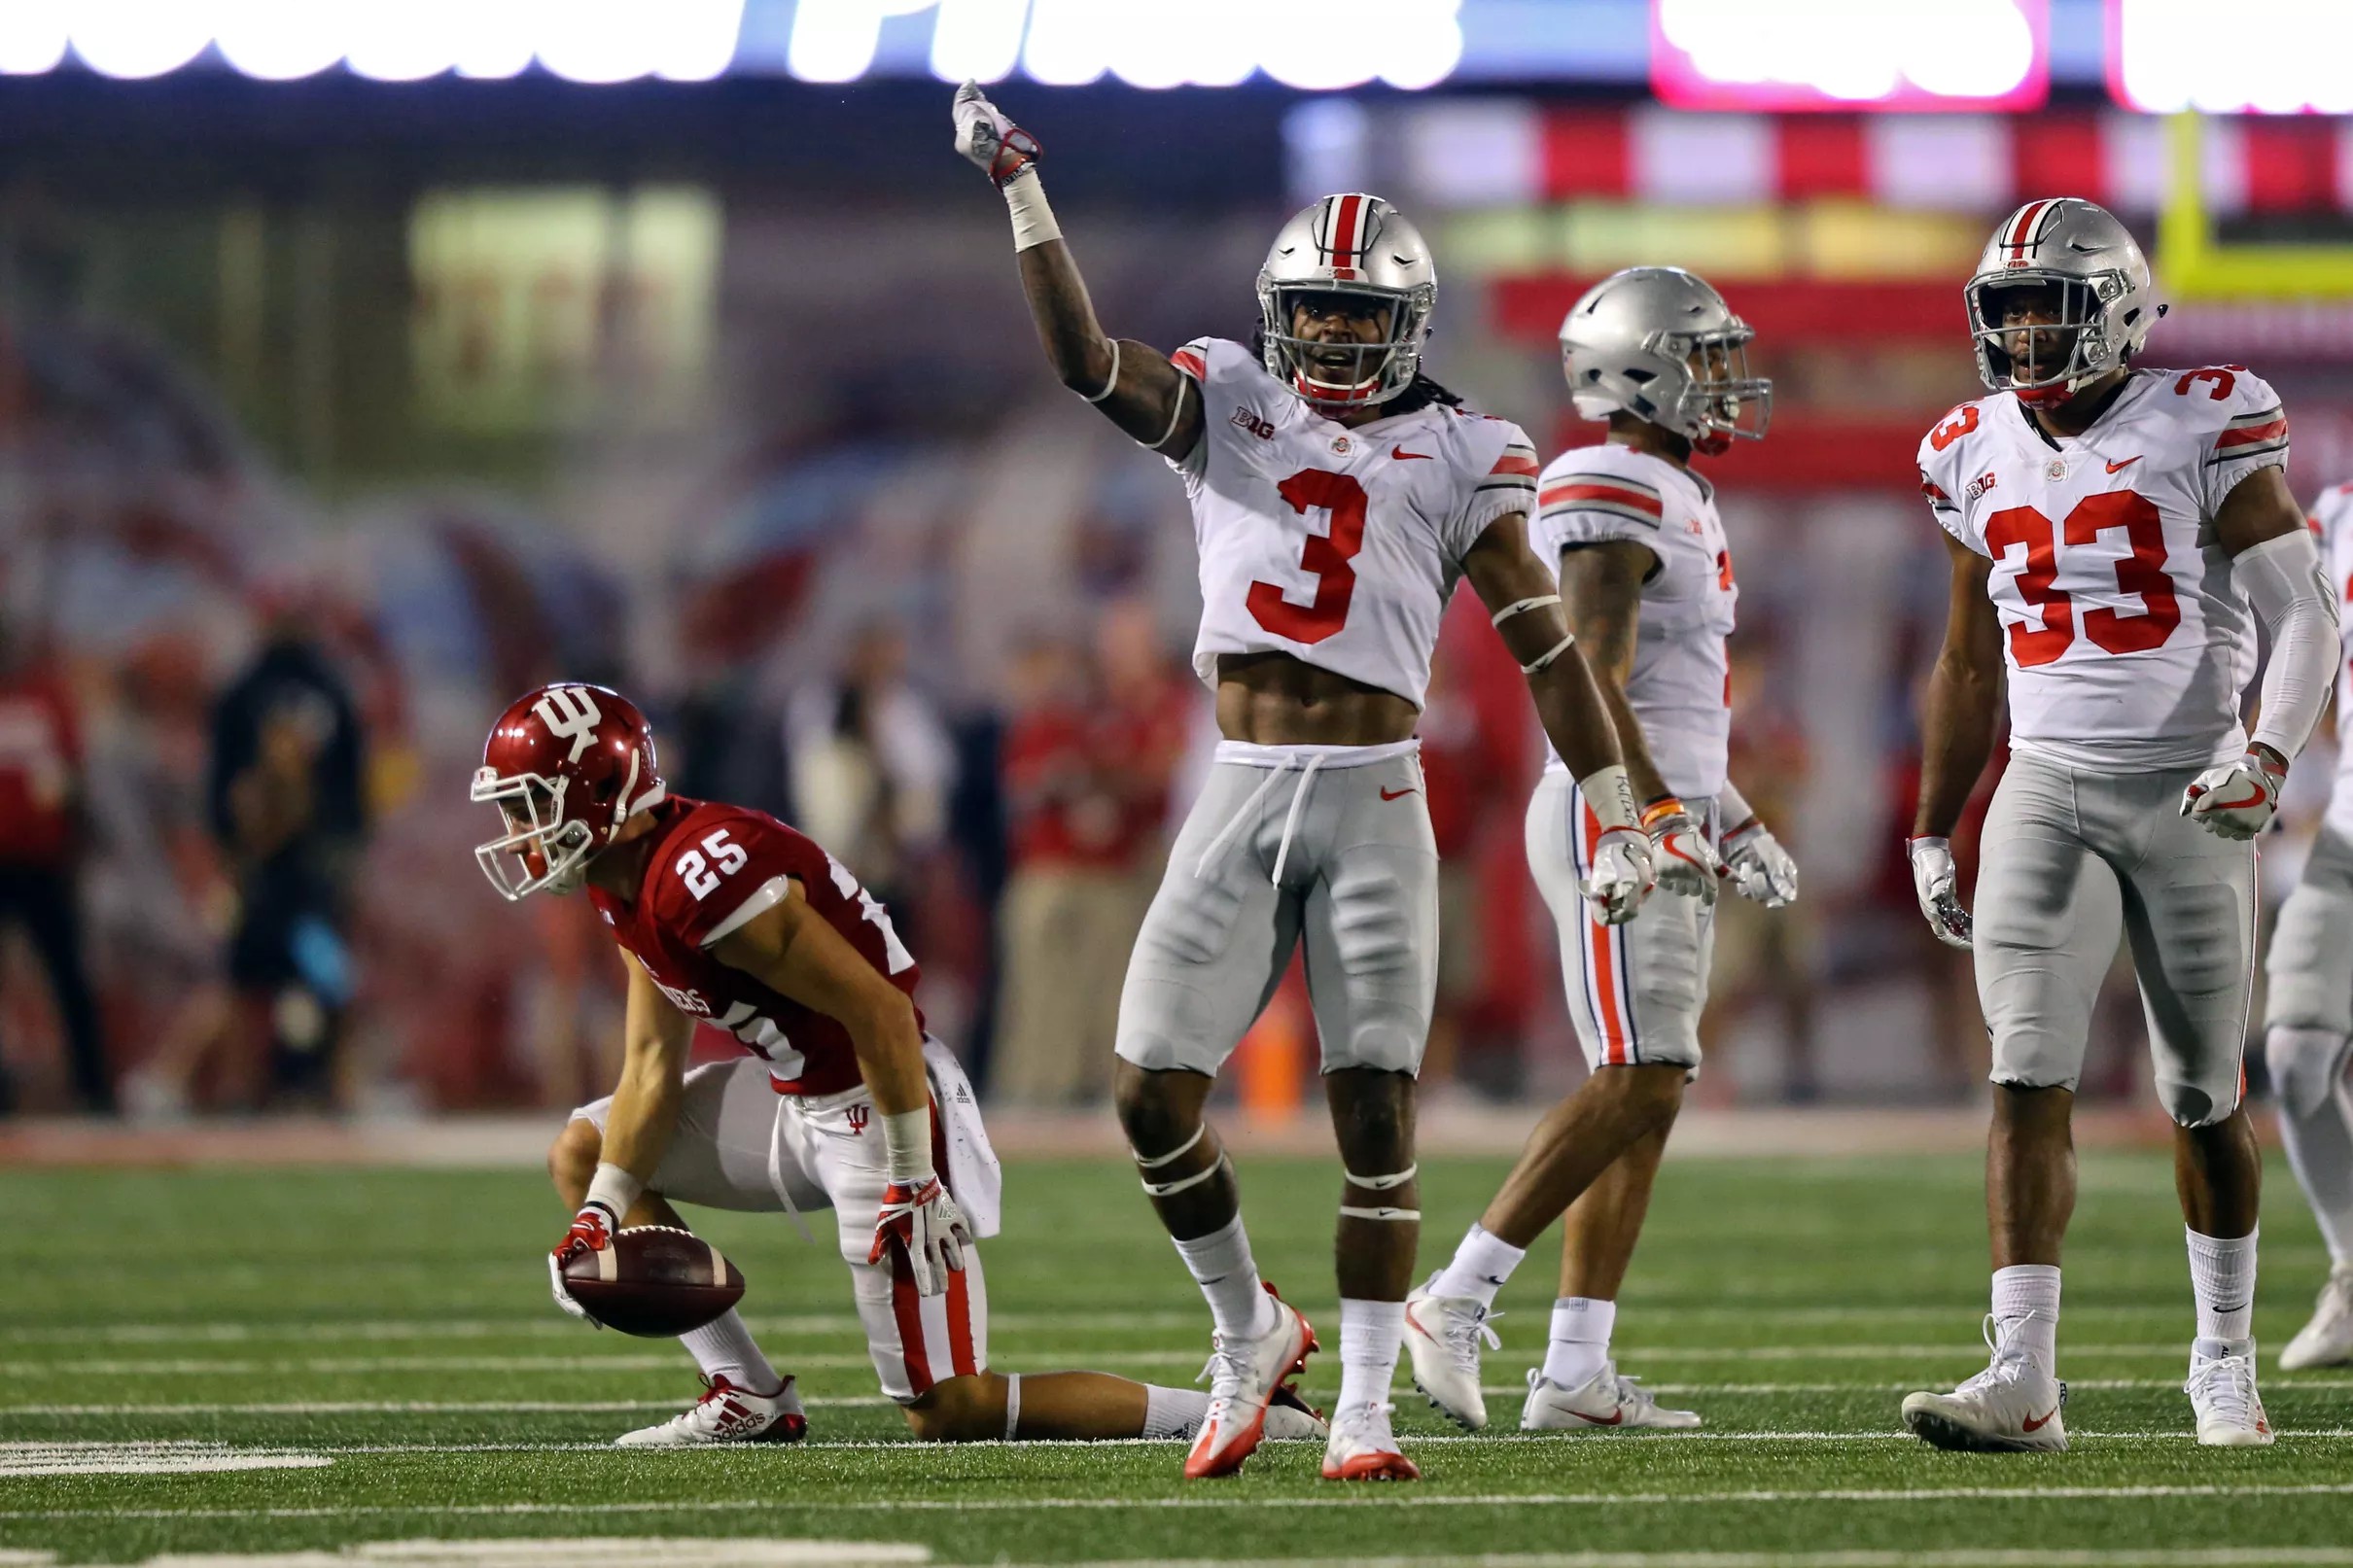 Ohio State’s cornerbacks are hoping to build off their season opening